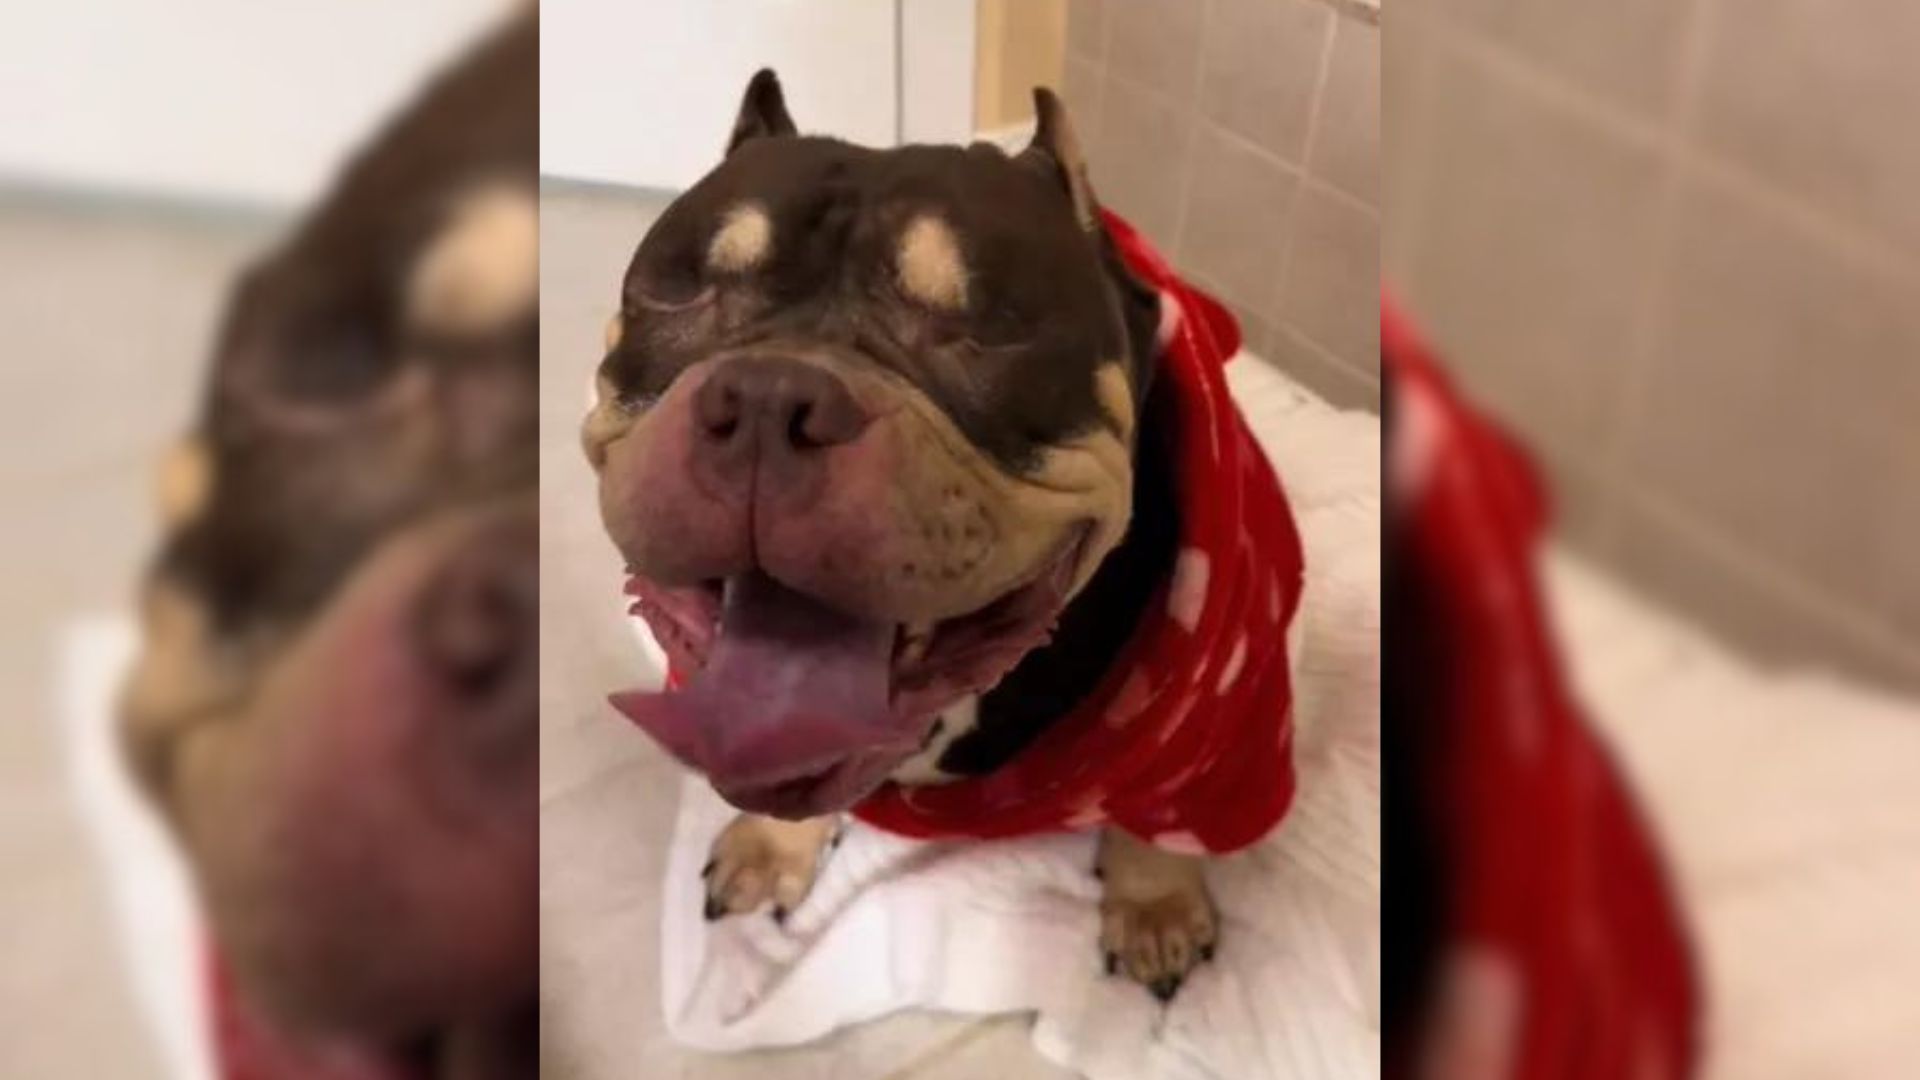 Owners Decide To Euthanize Their Perfectly Healthy Dog Because They Were Moving